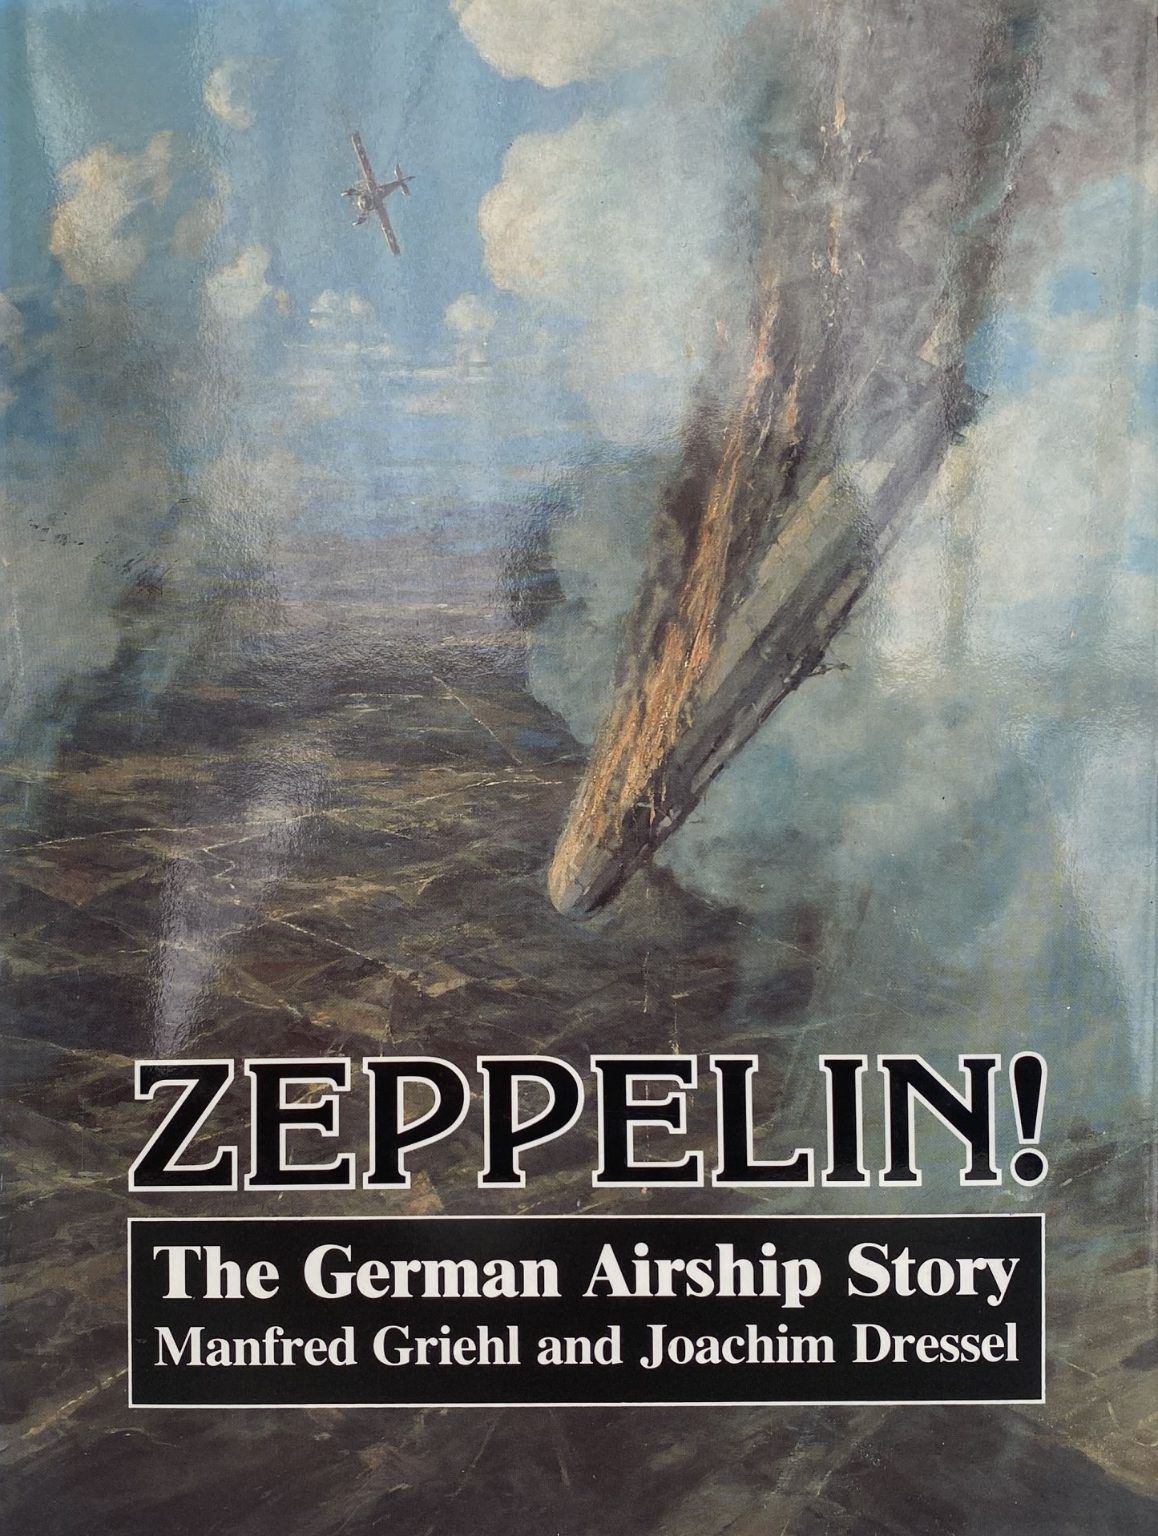 ZEPPELIN ! The German Airship Story